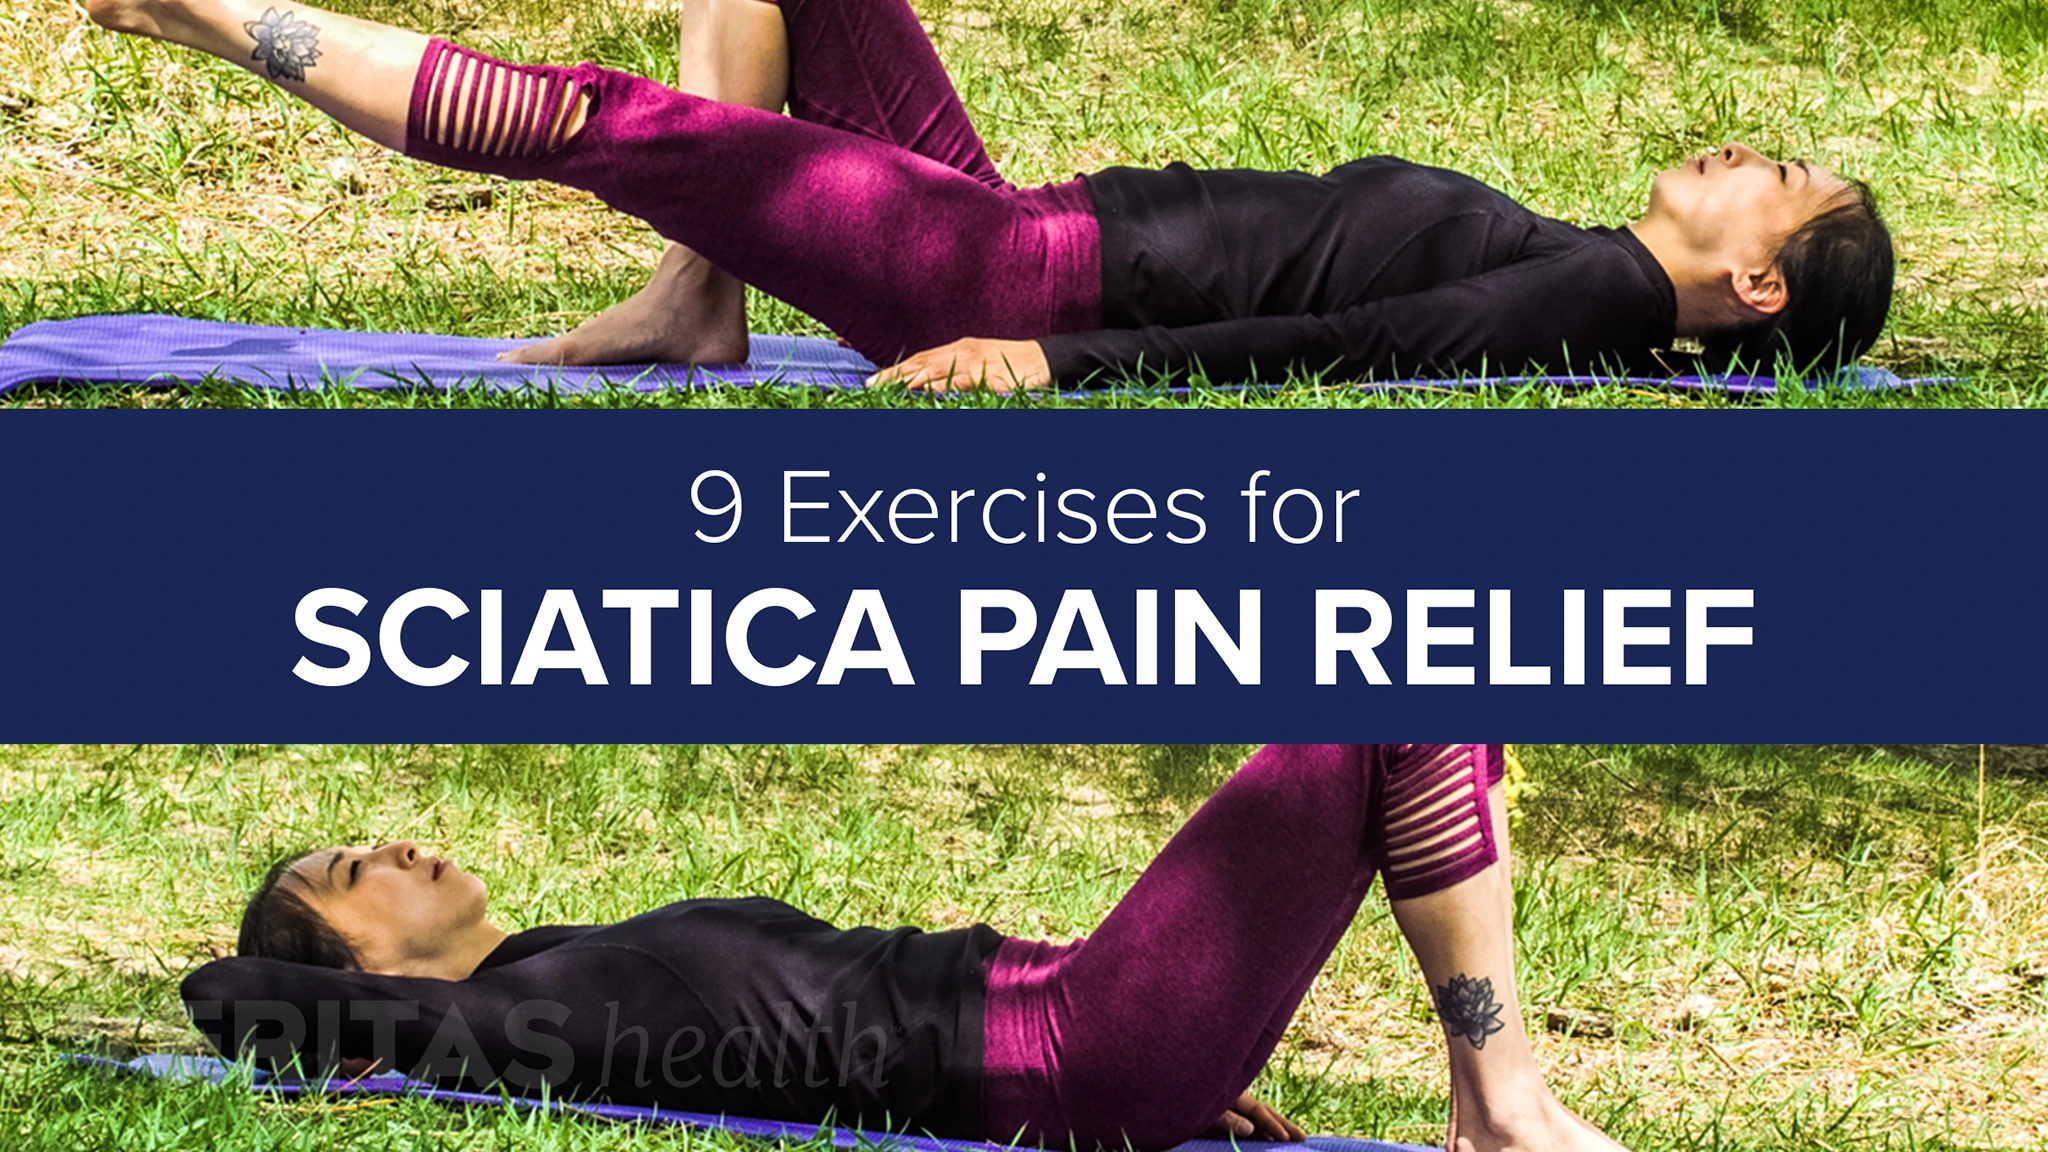 Healthy Tips For Sciatica Pain Relief by Stretch Zone - Issuu